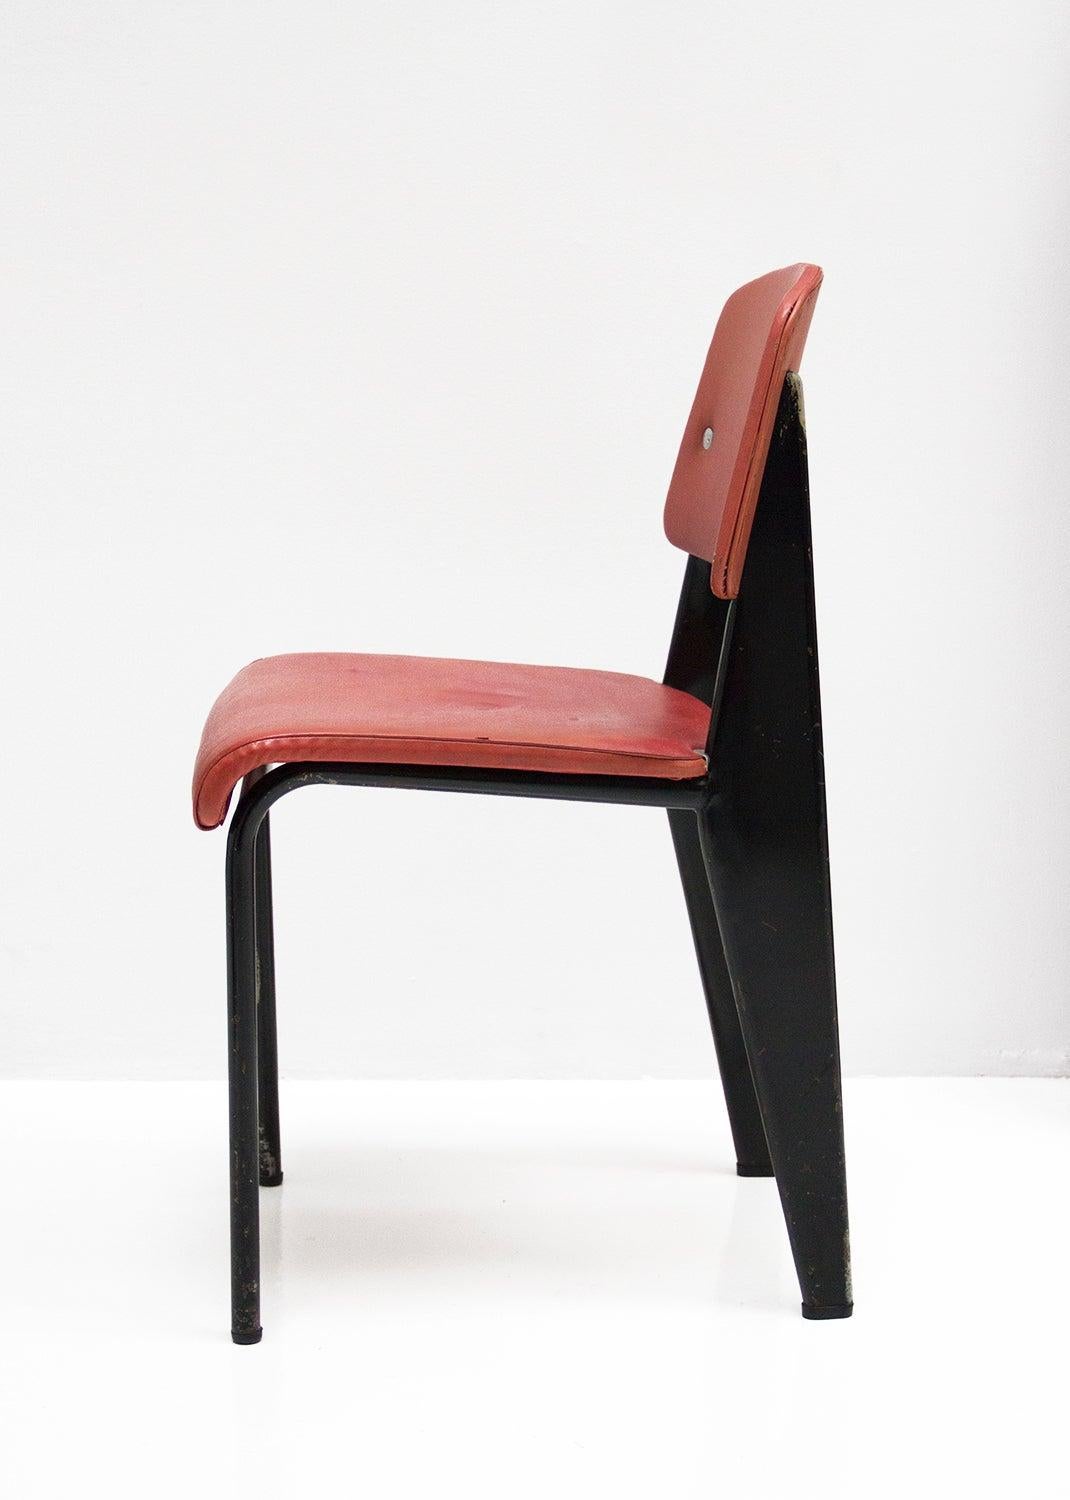 French Standard Chair Designed by Jean Prouve, circa 1950, France, Red, Original For Sale